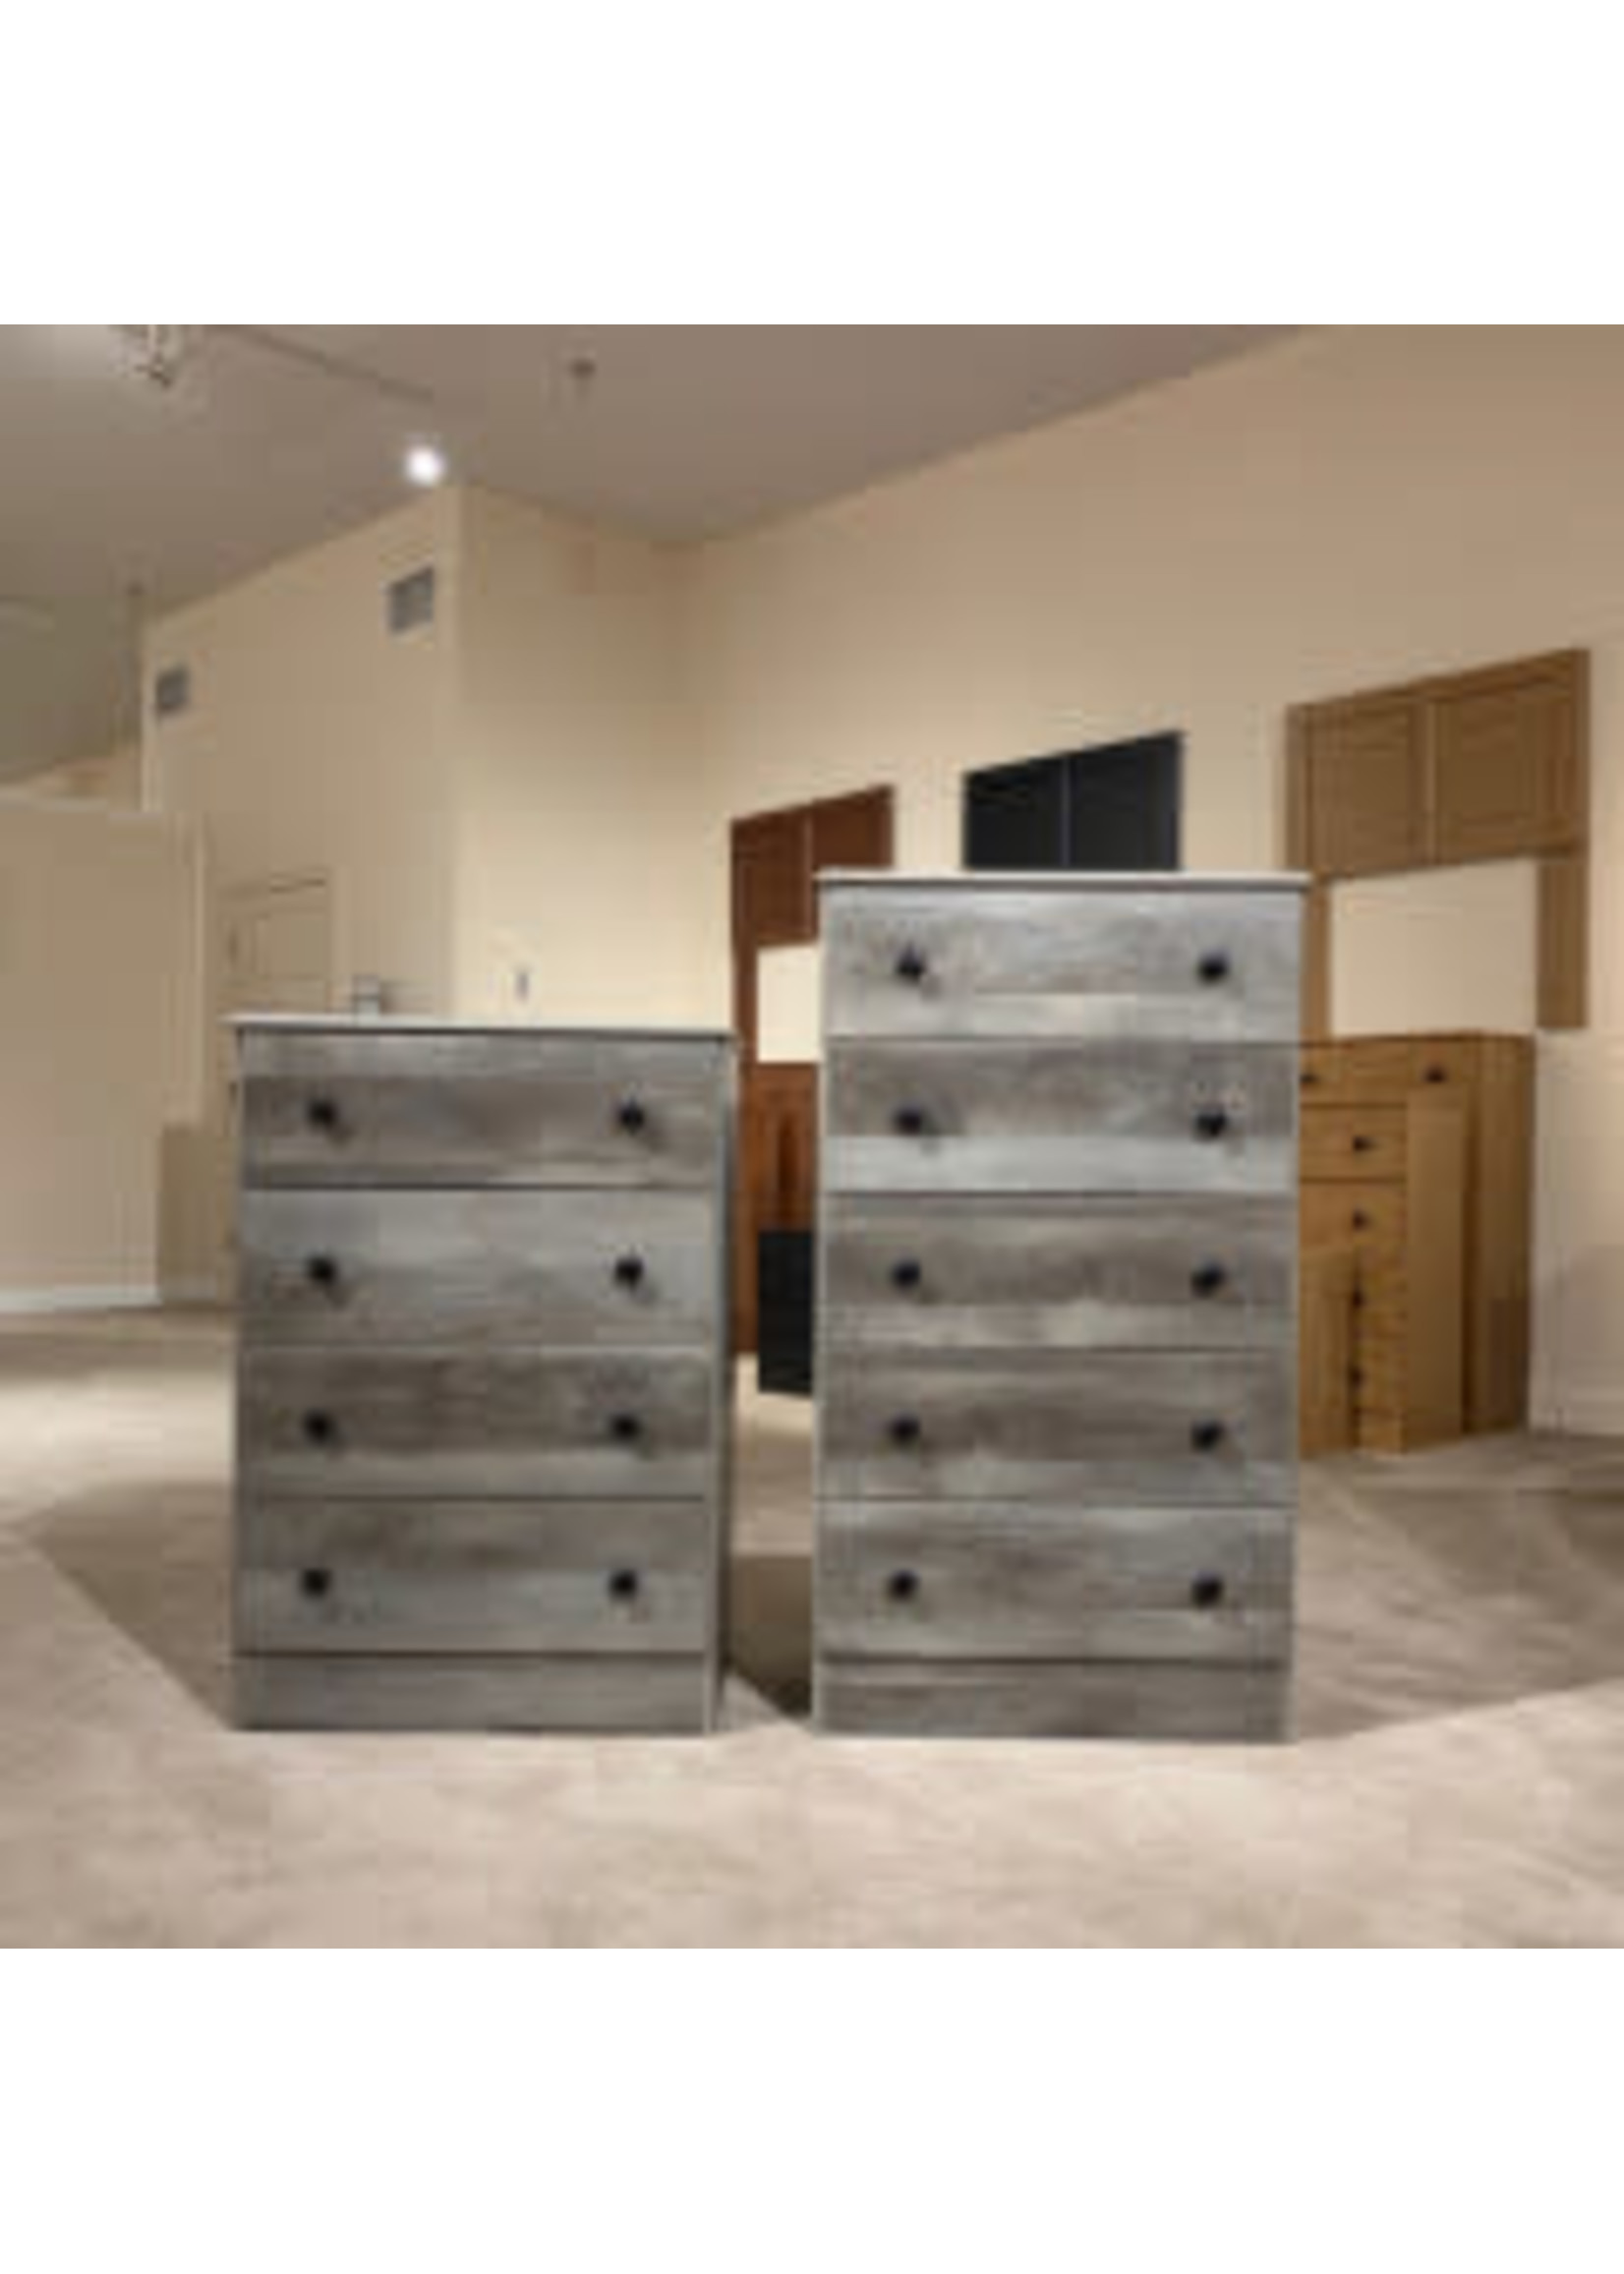 KITH FURNITURE 194-04 GREY 4 DRAWER CHEST